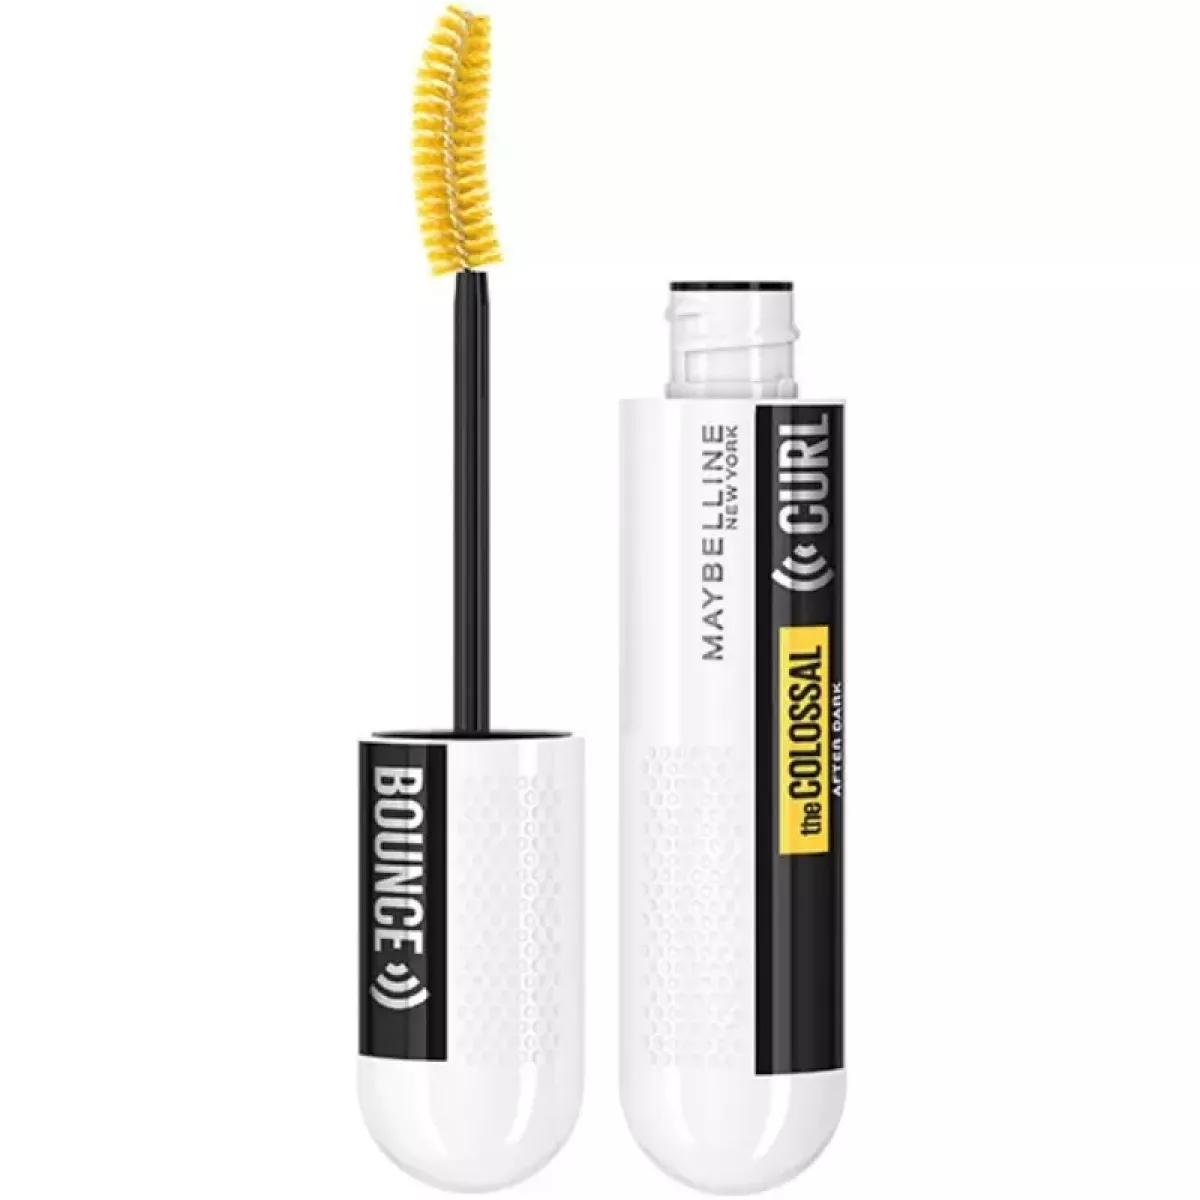 #3 - Maybelline New York The Colossal Curl Bounce Mascara 10 ml - After Dark Black